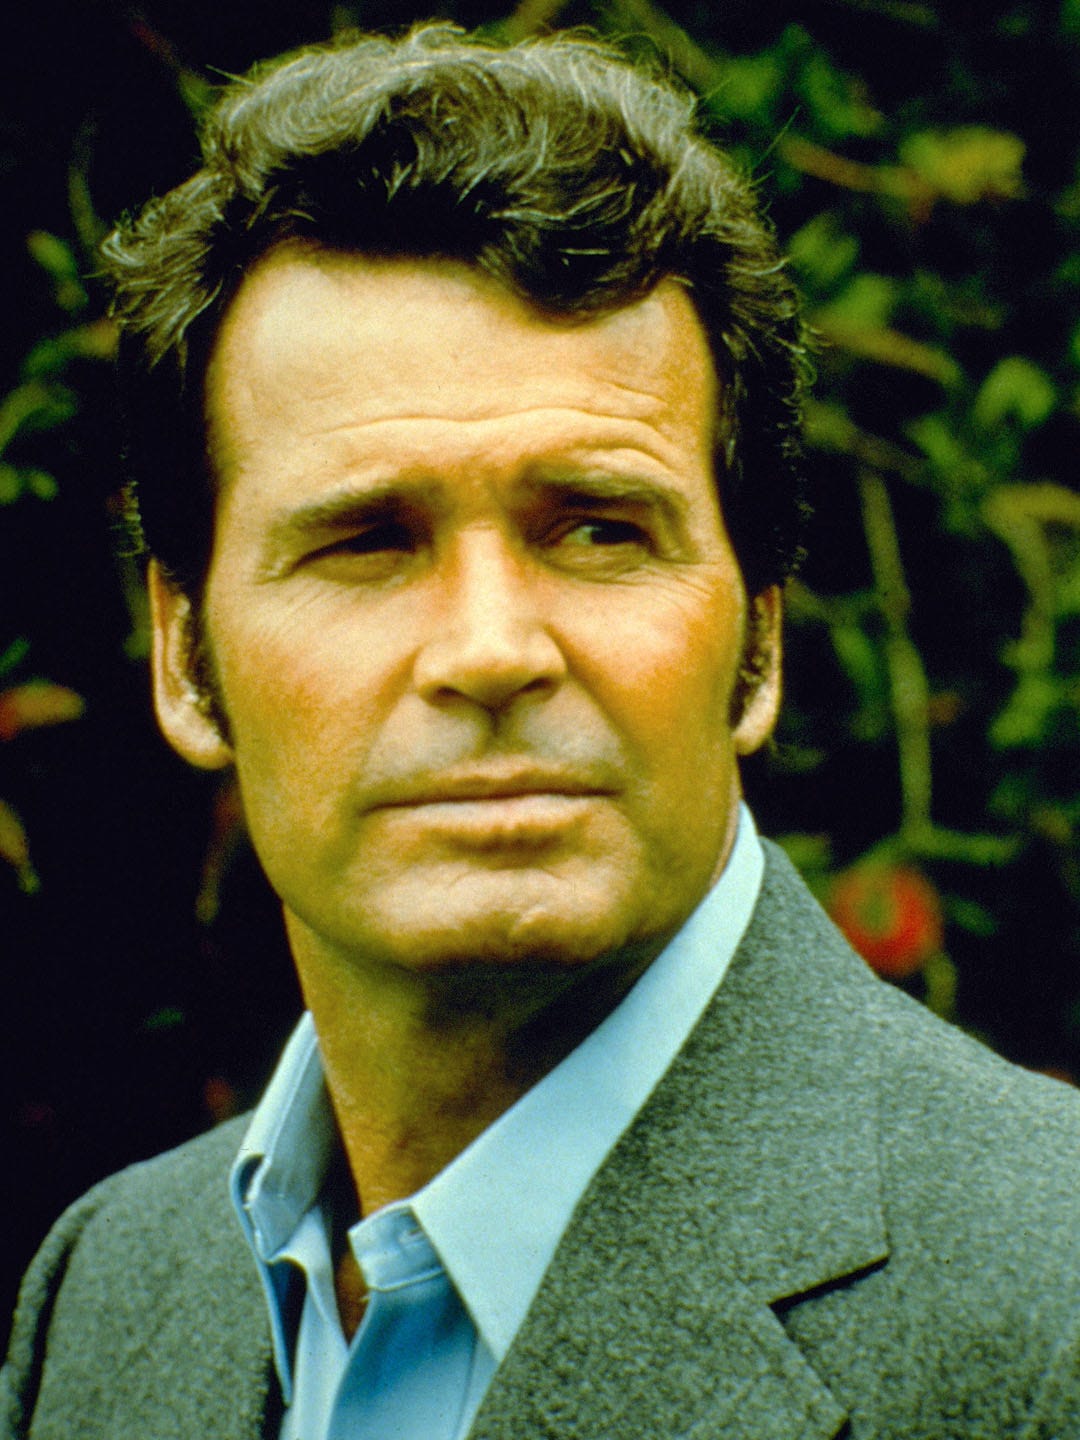 A headshot of the very handsome and debonnaire James Garner, in his role as Jim Rockford. He is squinting in a manly way and looking over to his left.